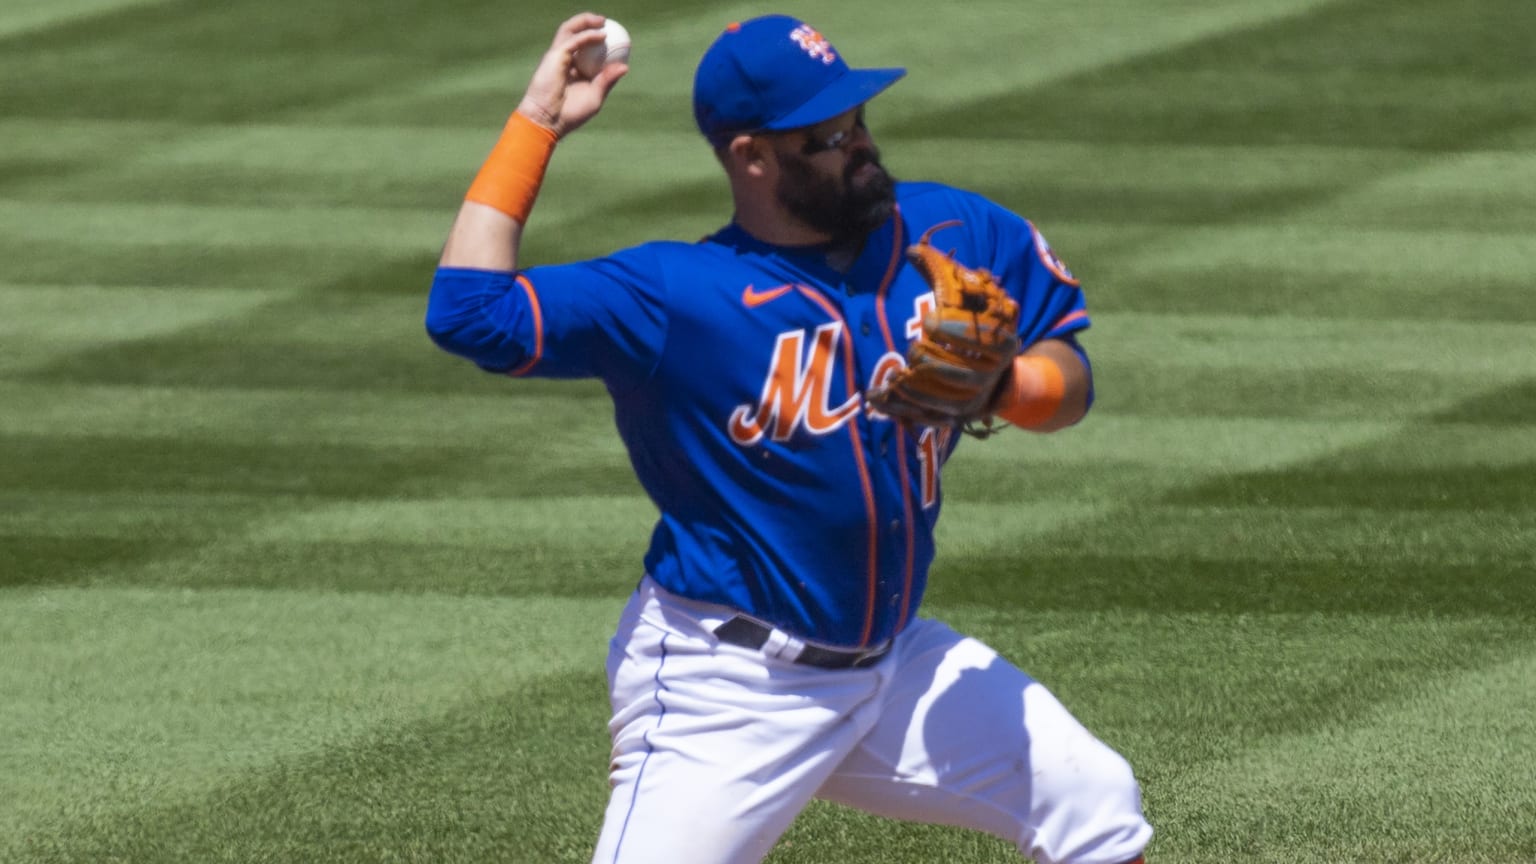 Luis Guillorme of the Mets throwing the baseball